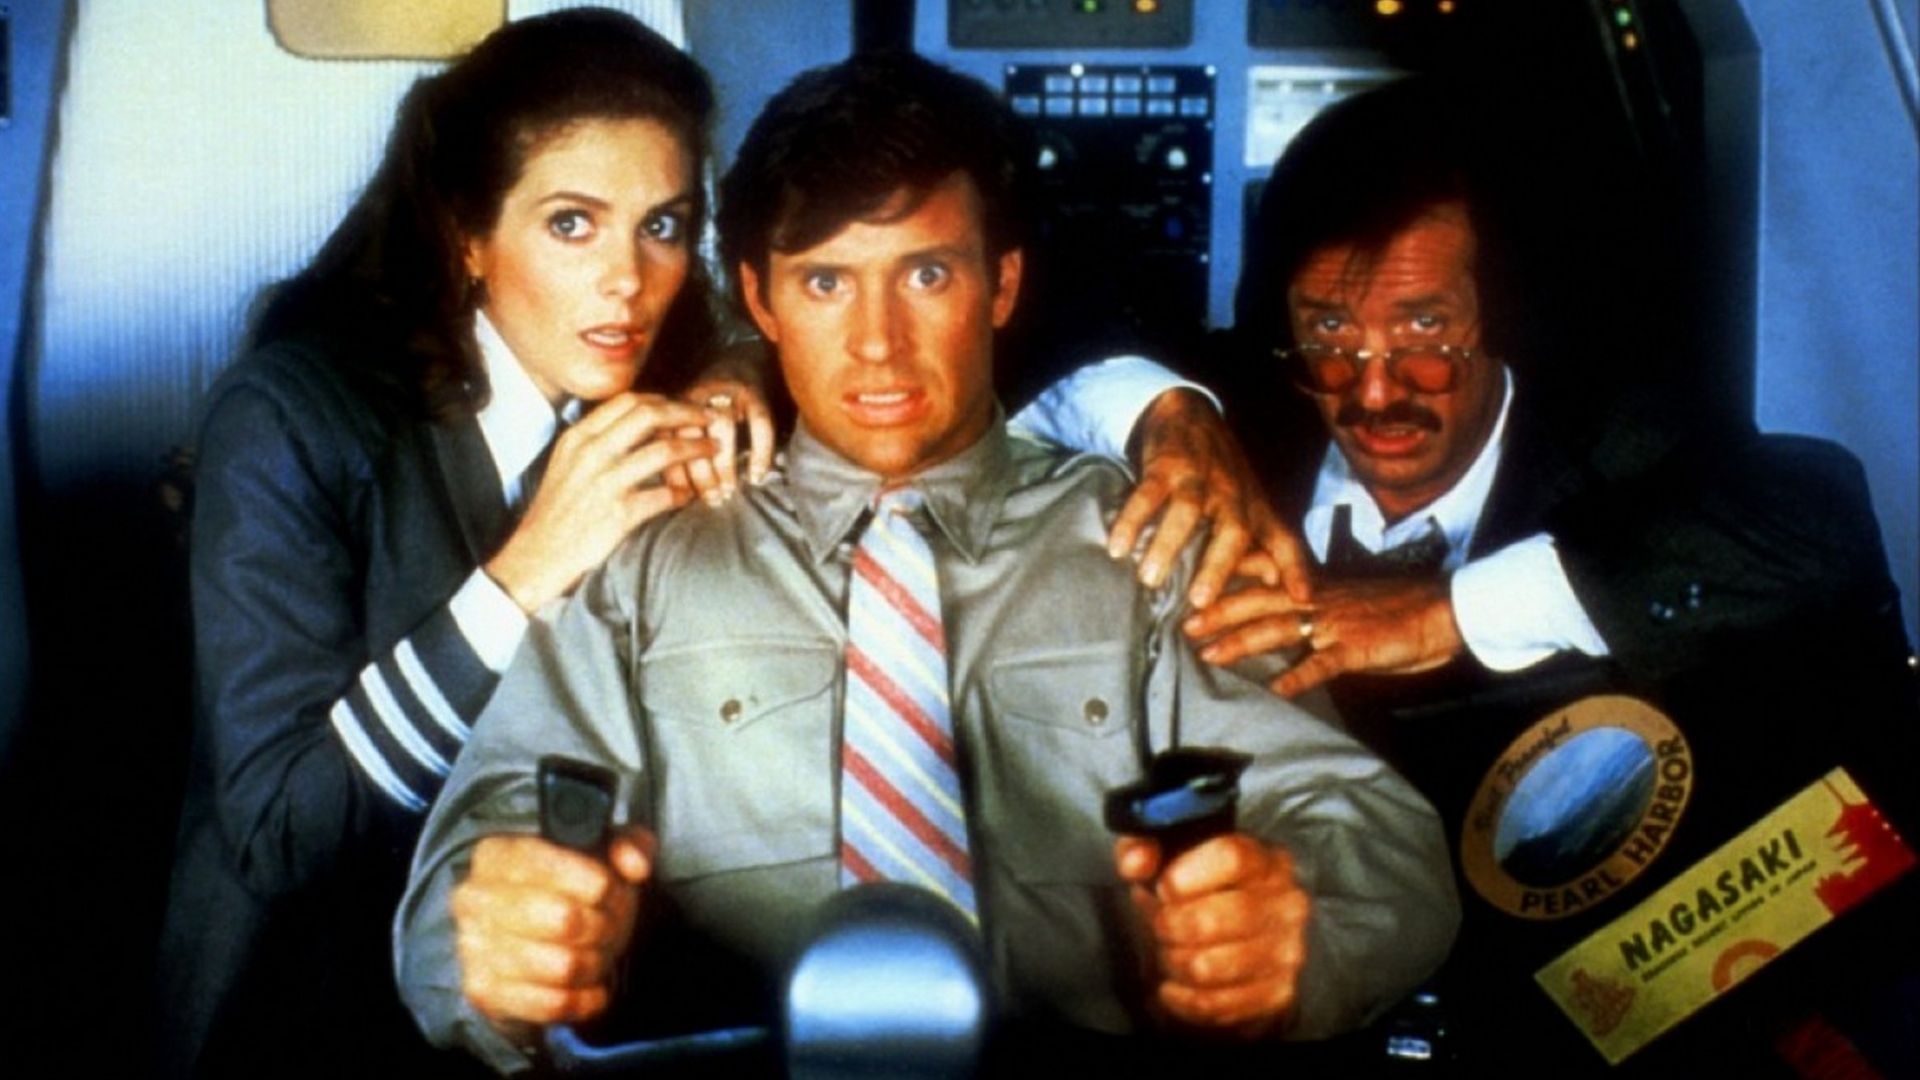 Union Films Review Airplane!